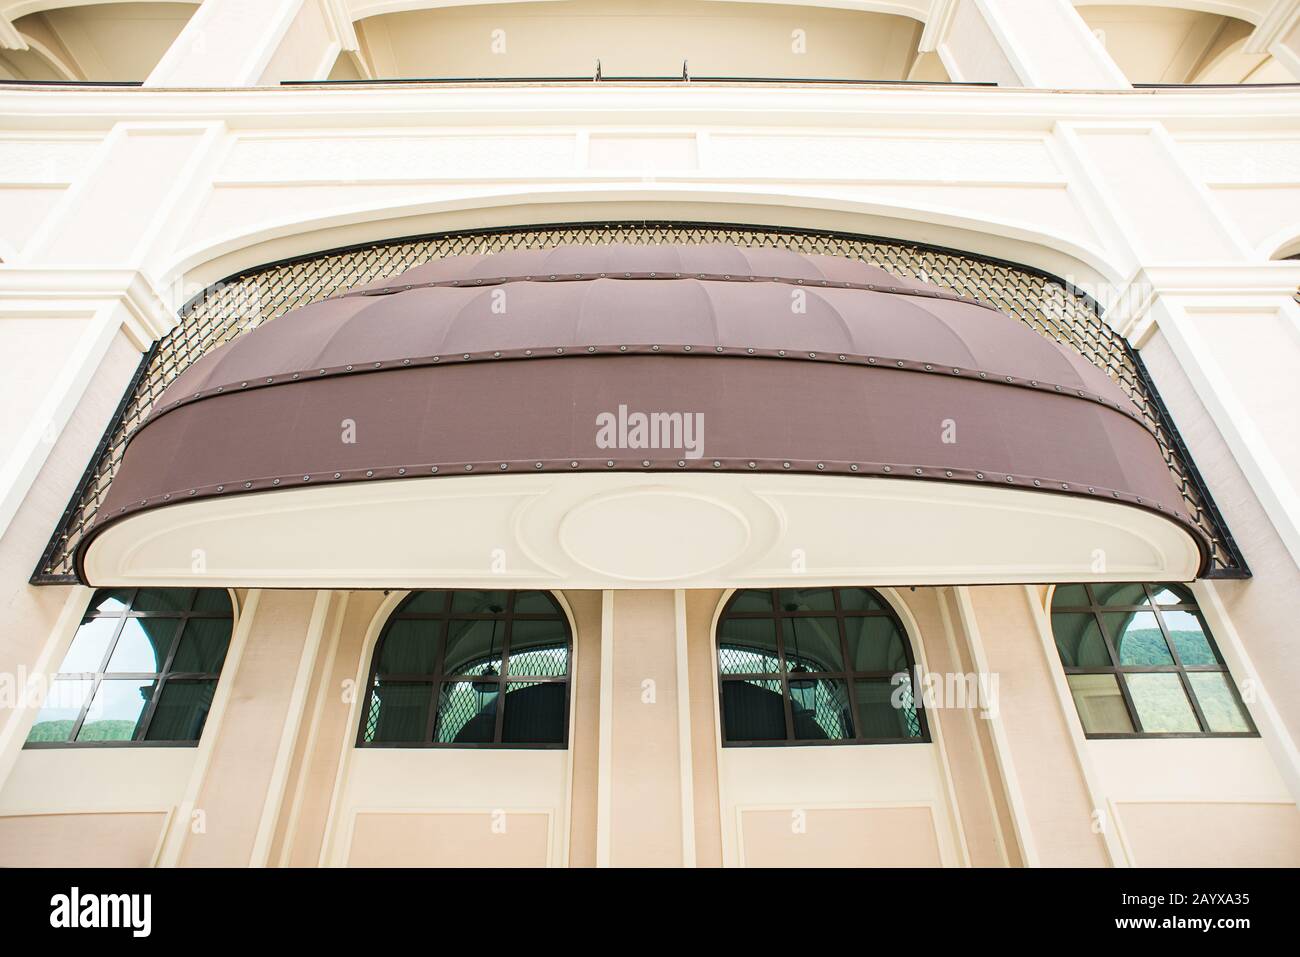 Brown awning Over Cafe Window. Cafe Tent. Canopy Sunshade for Store Window, Outdoor Market Awnings. Stock Photo